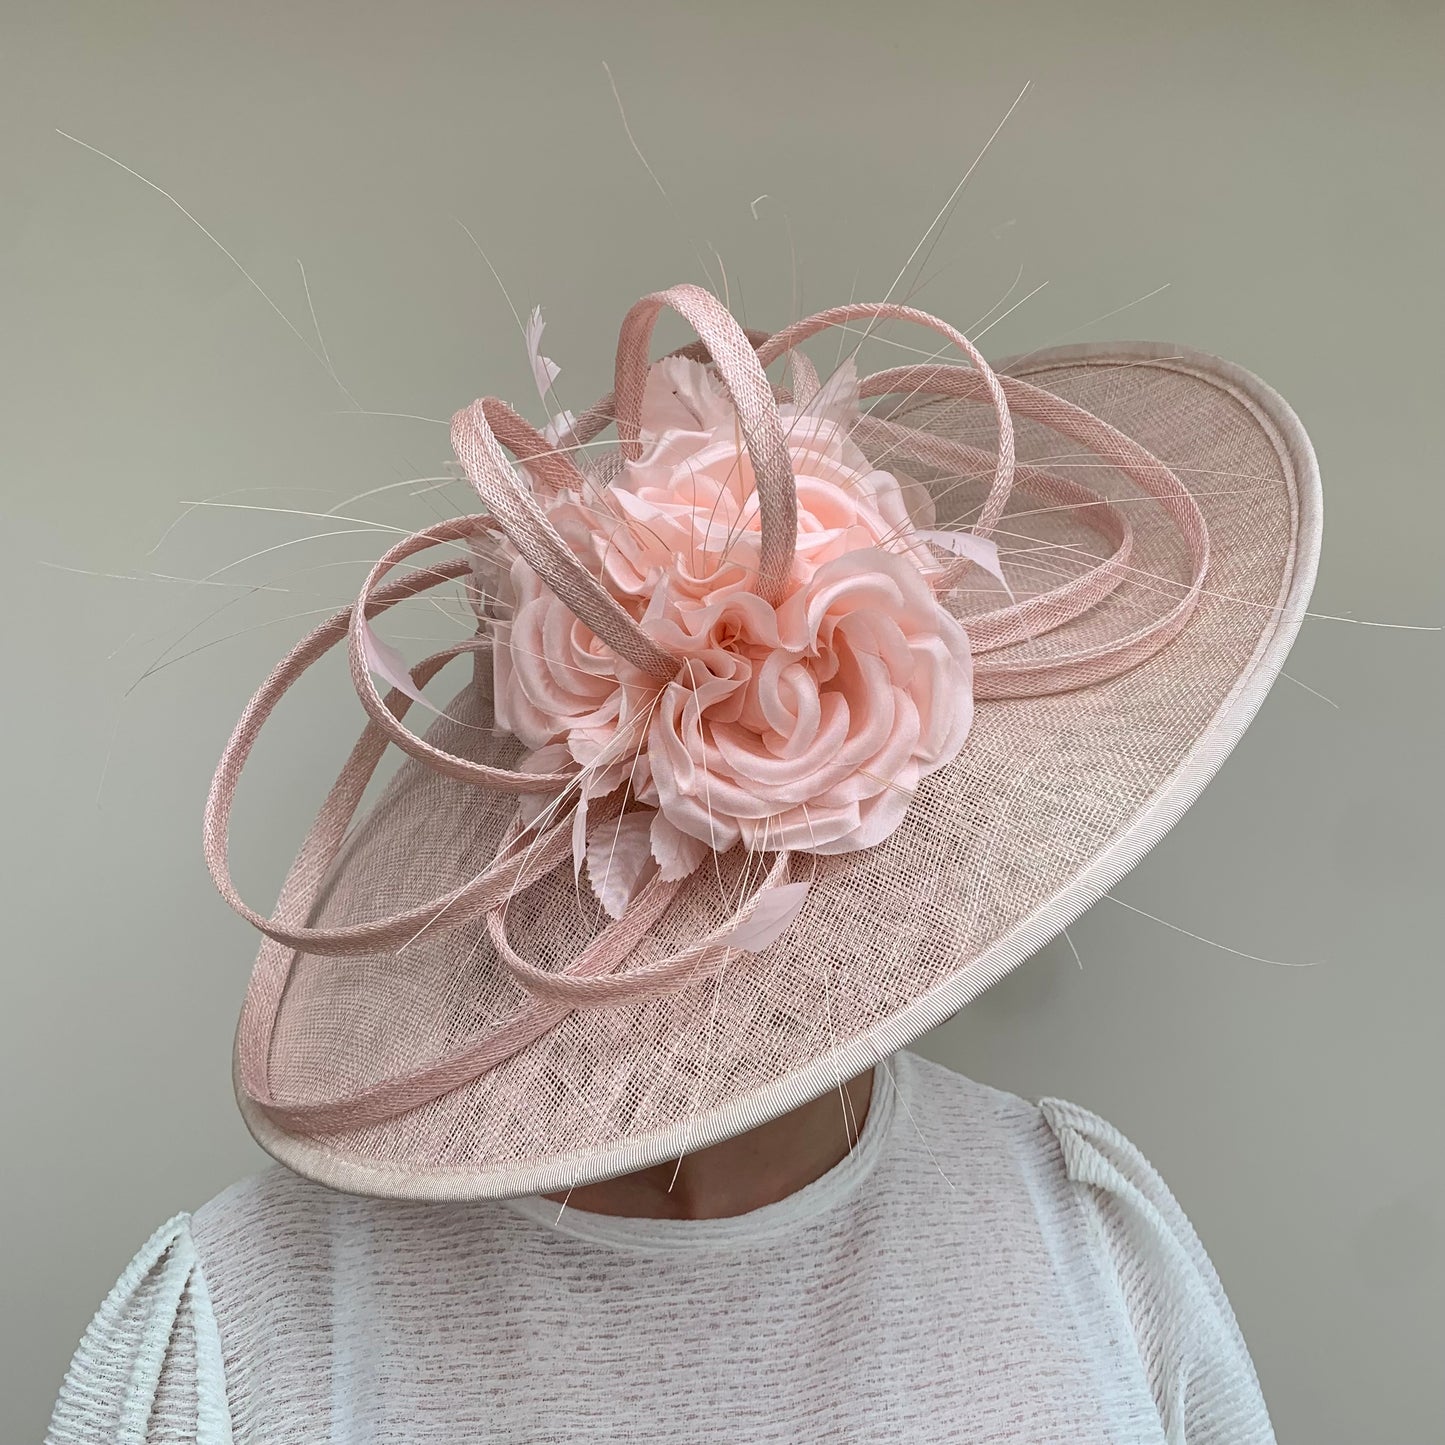 J Bees JB22/258 Large Hatinator in Pinks